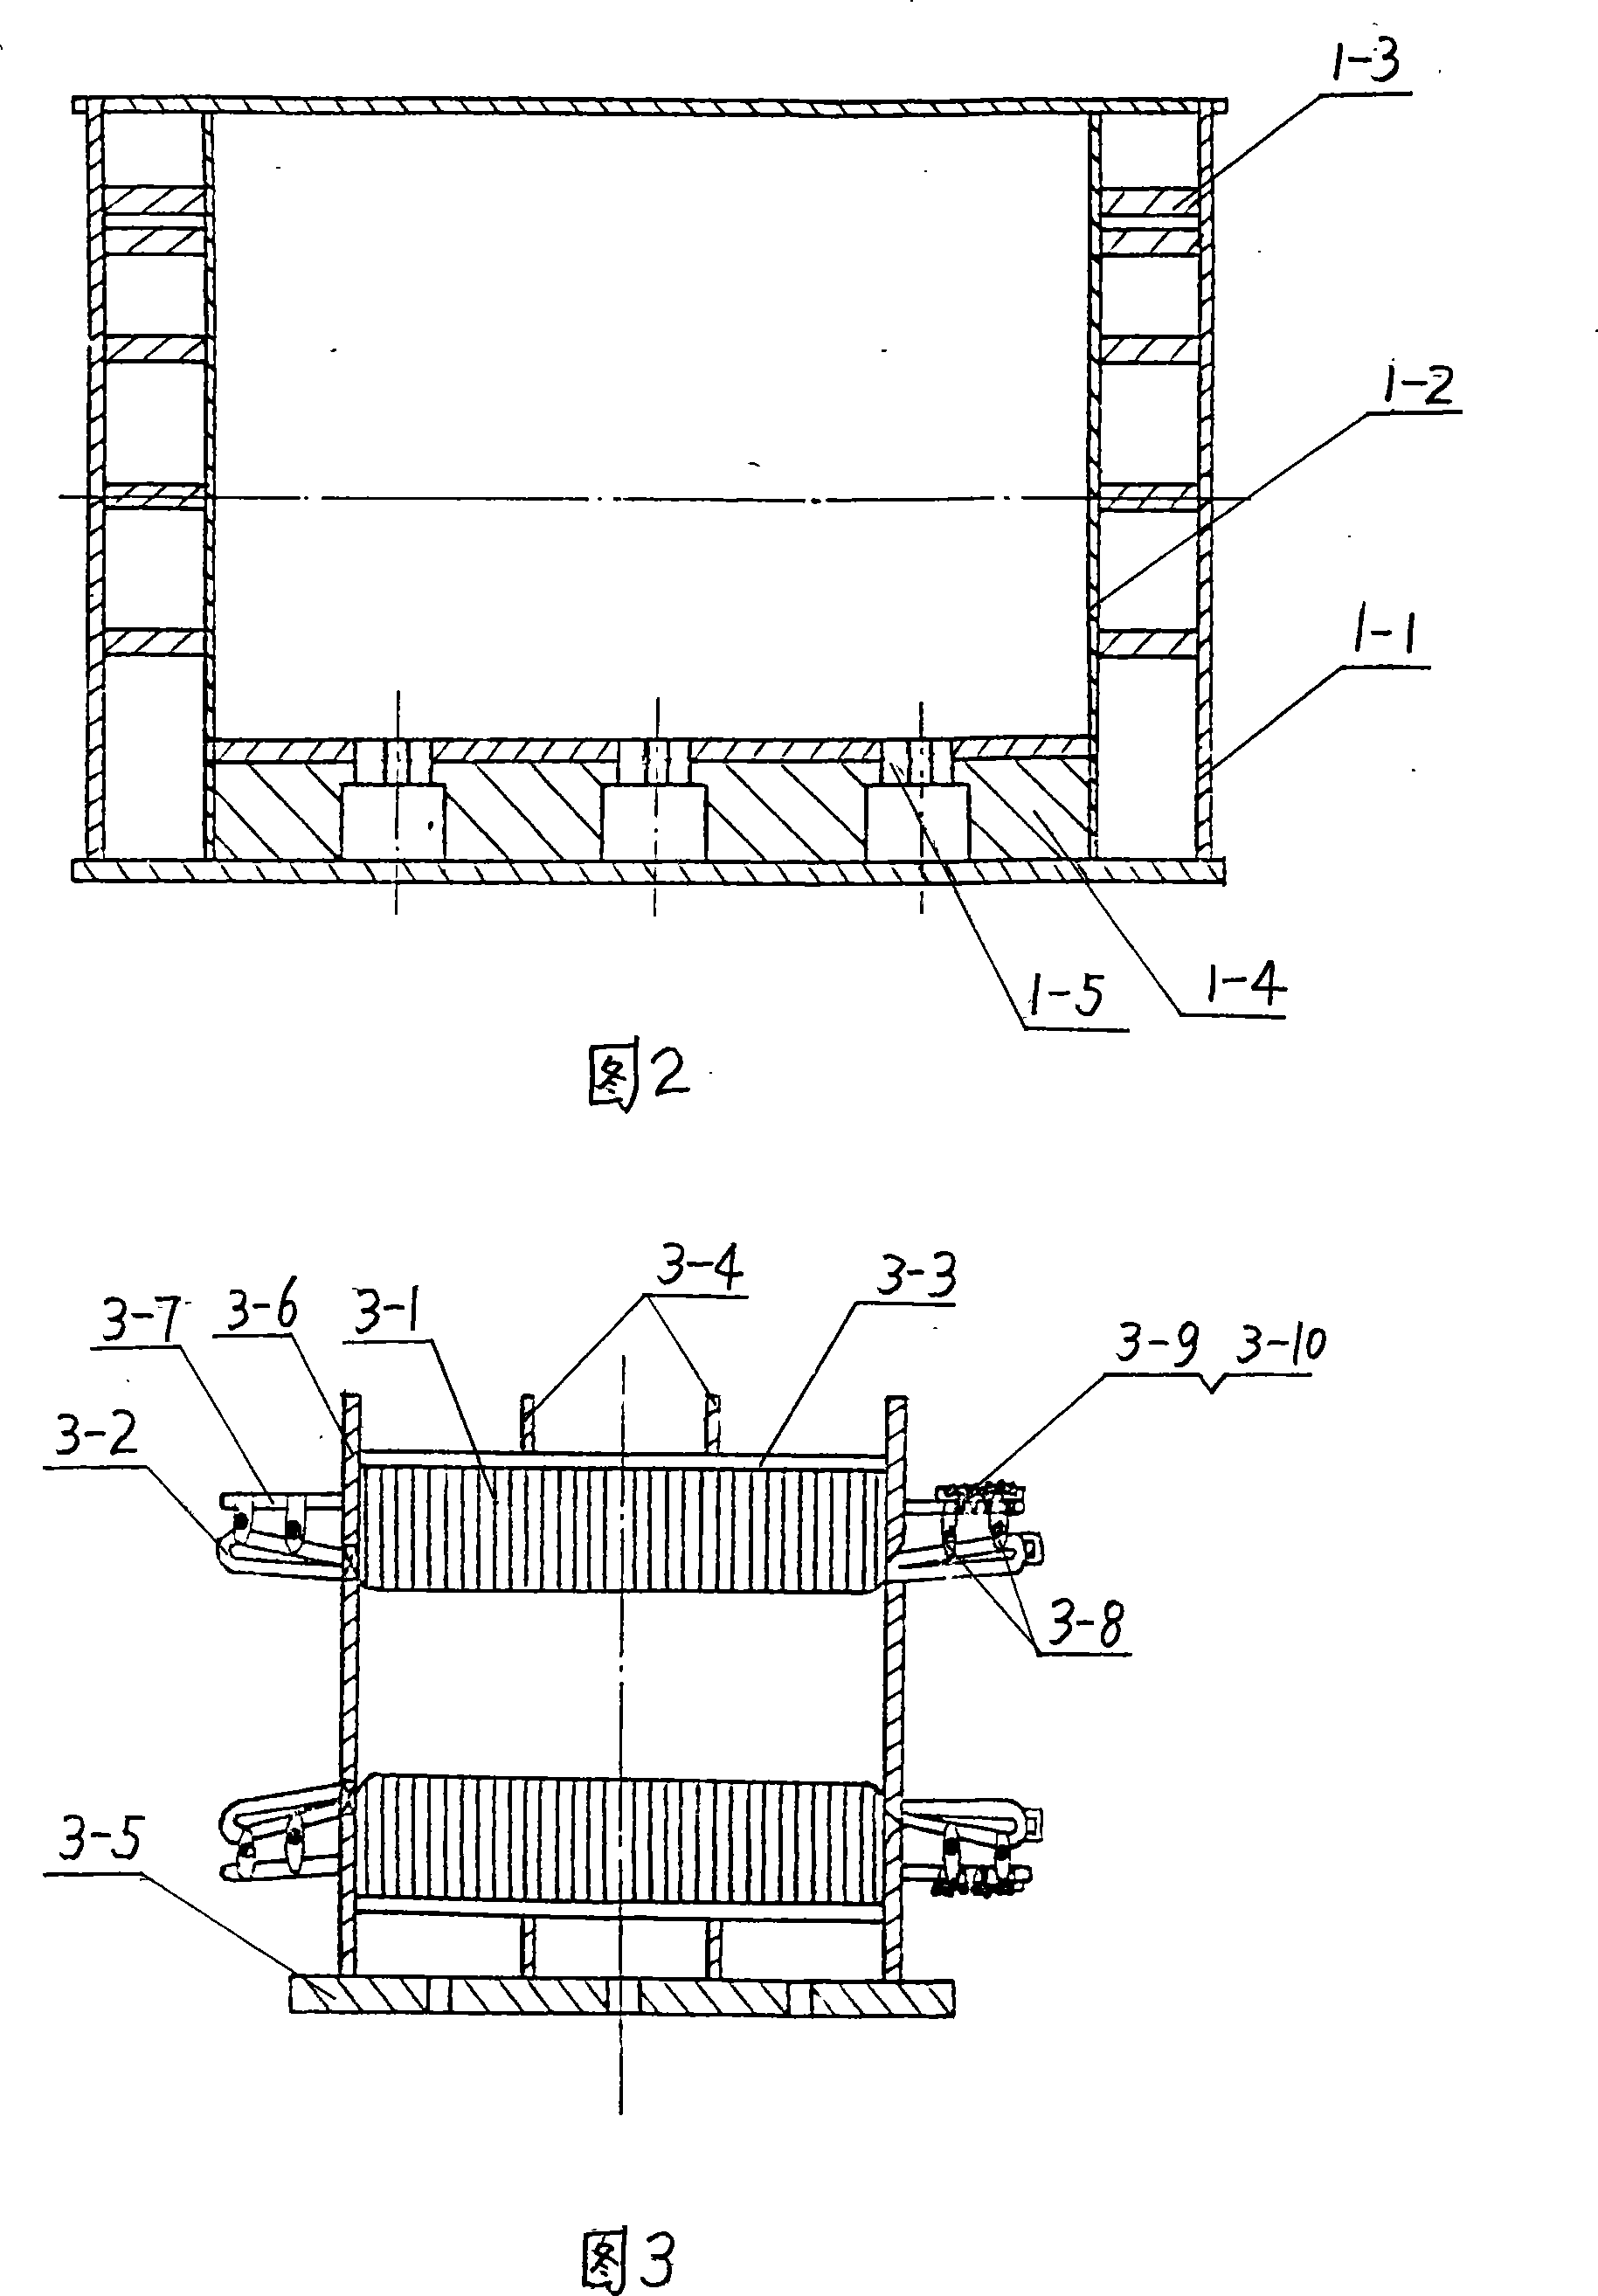 High-capacity non-salient pole nest plate type synchronous generator